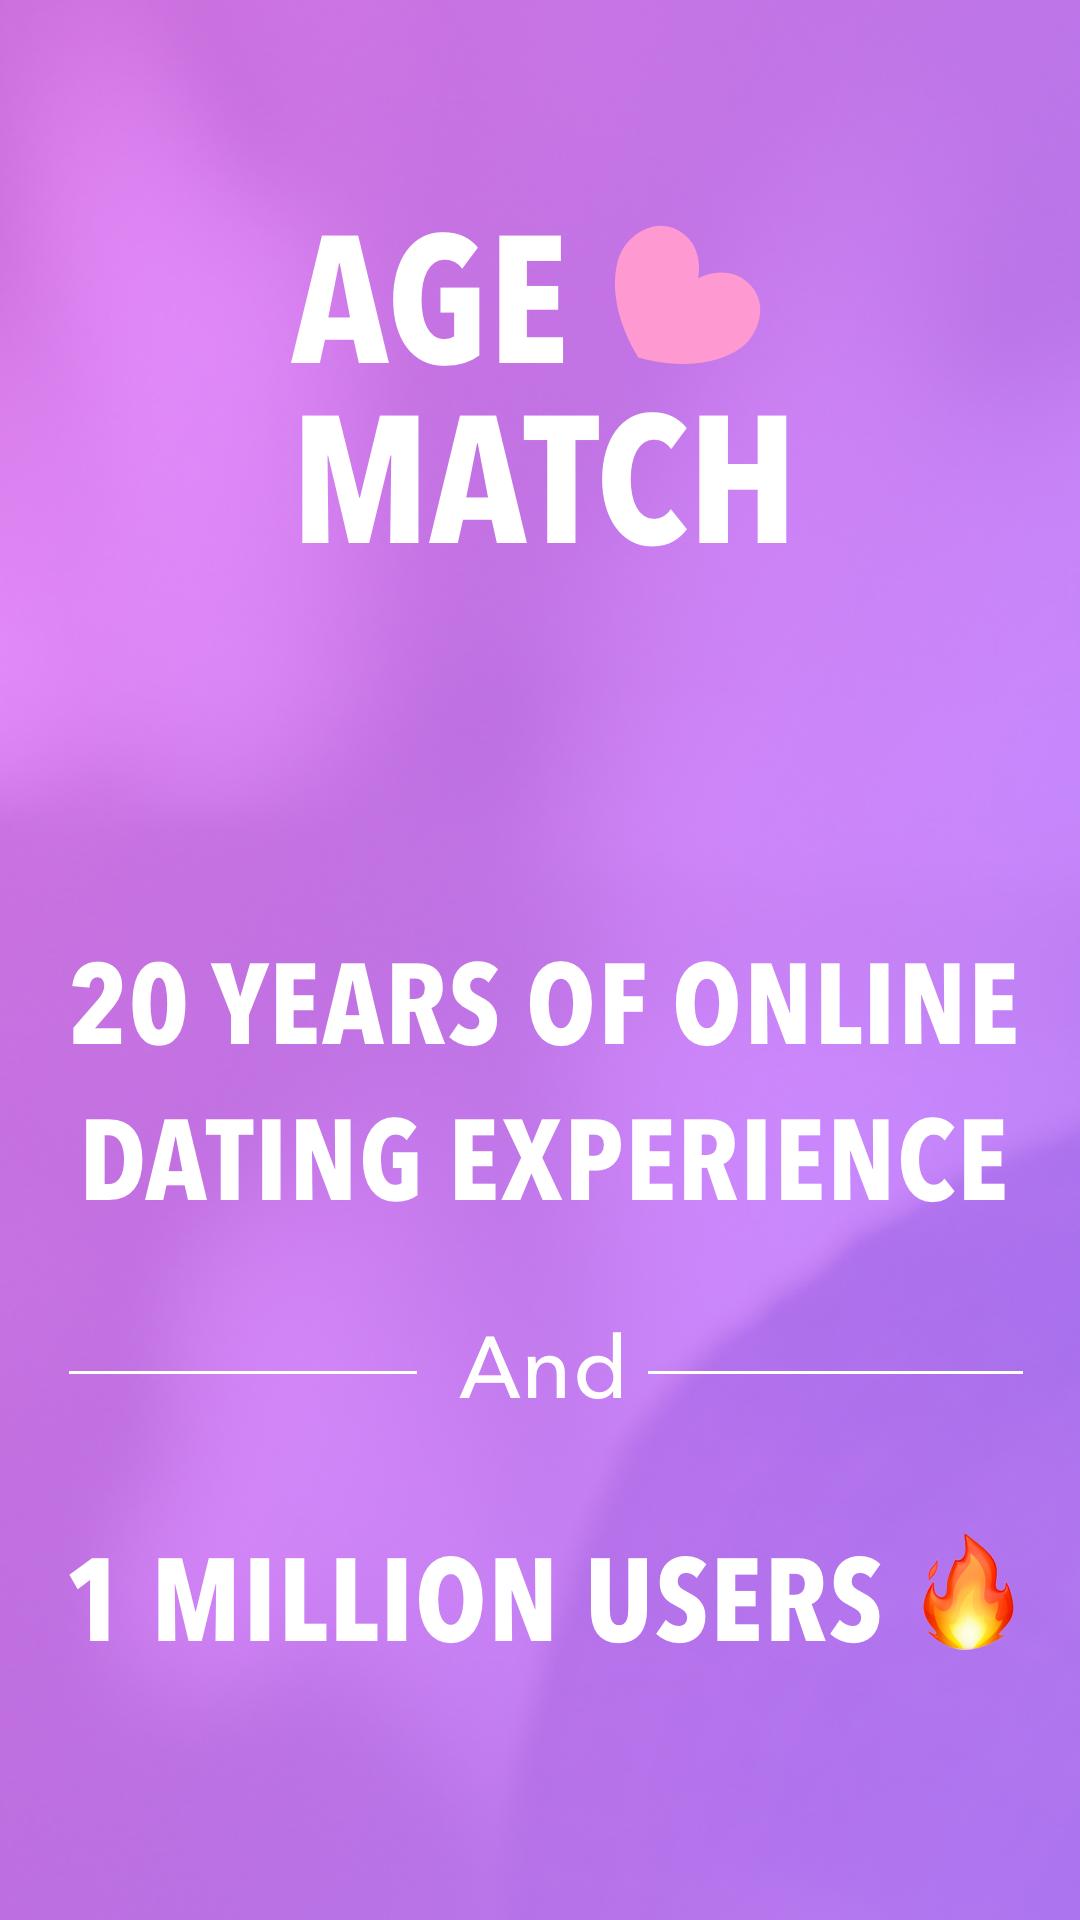 Age matched